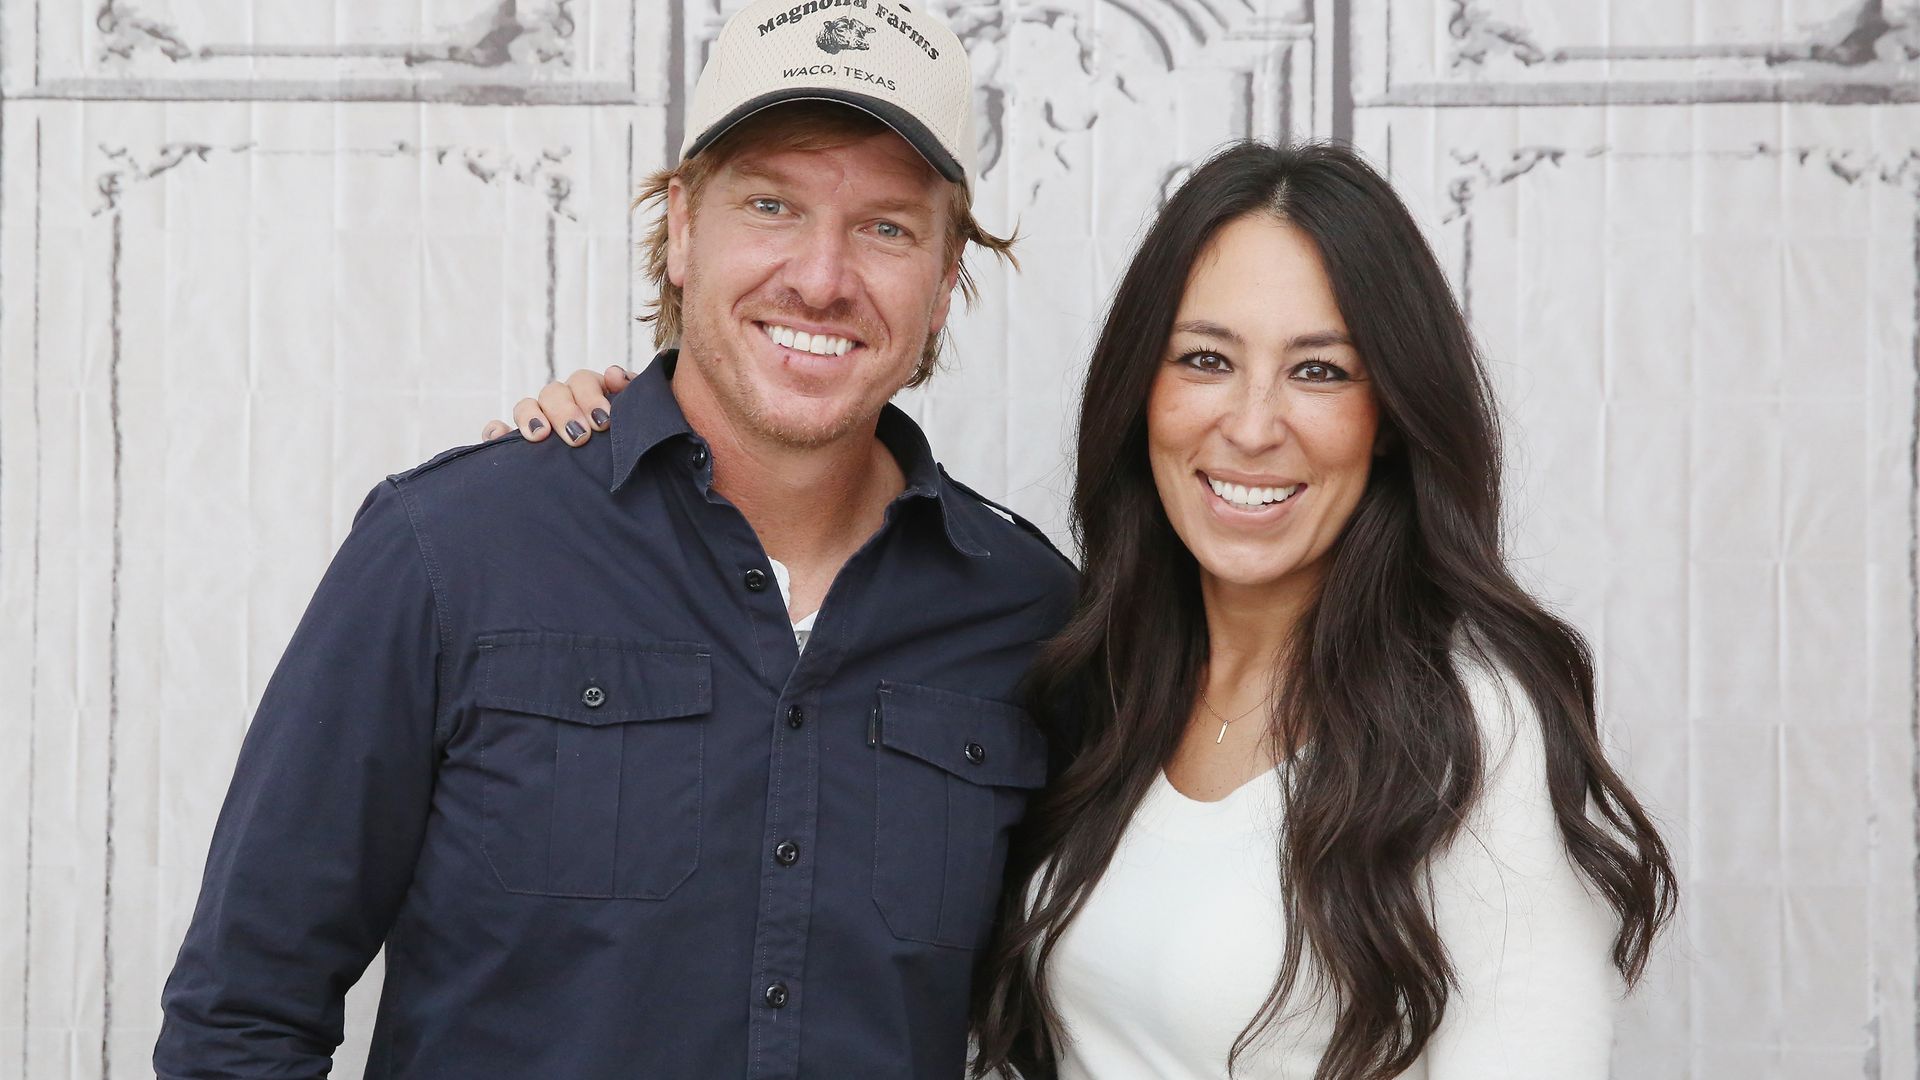 joanna gaines chip gaines smiling arms around each other